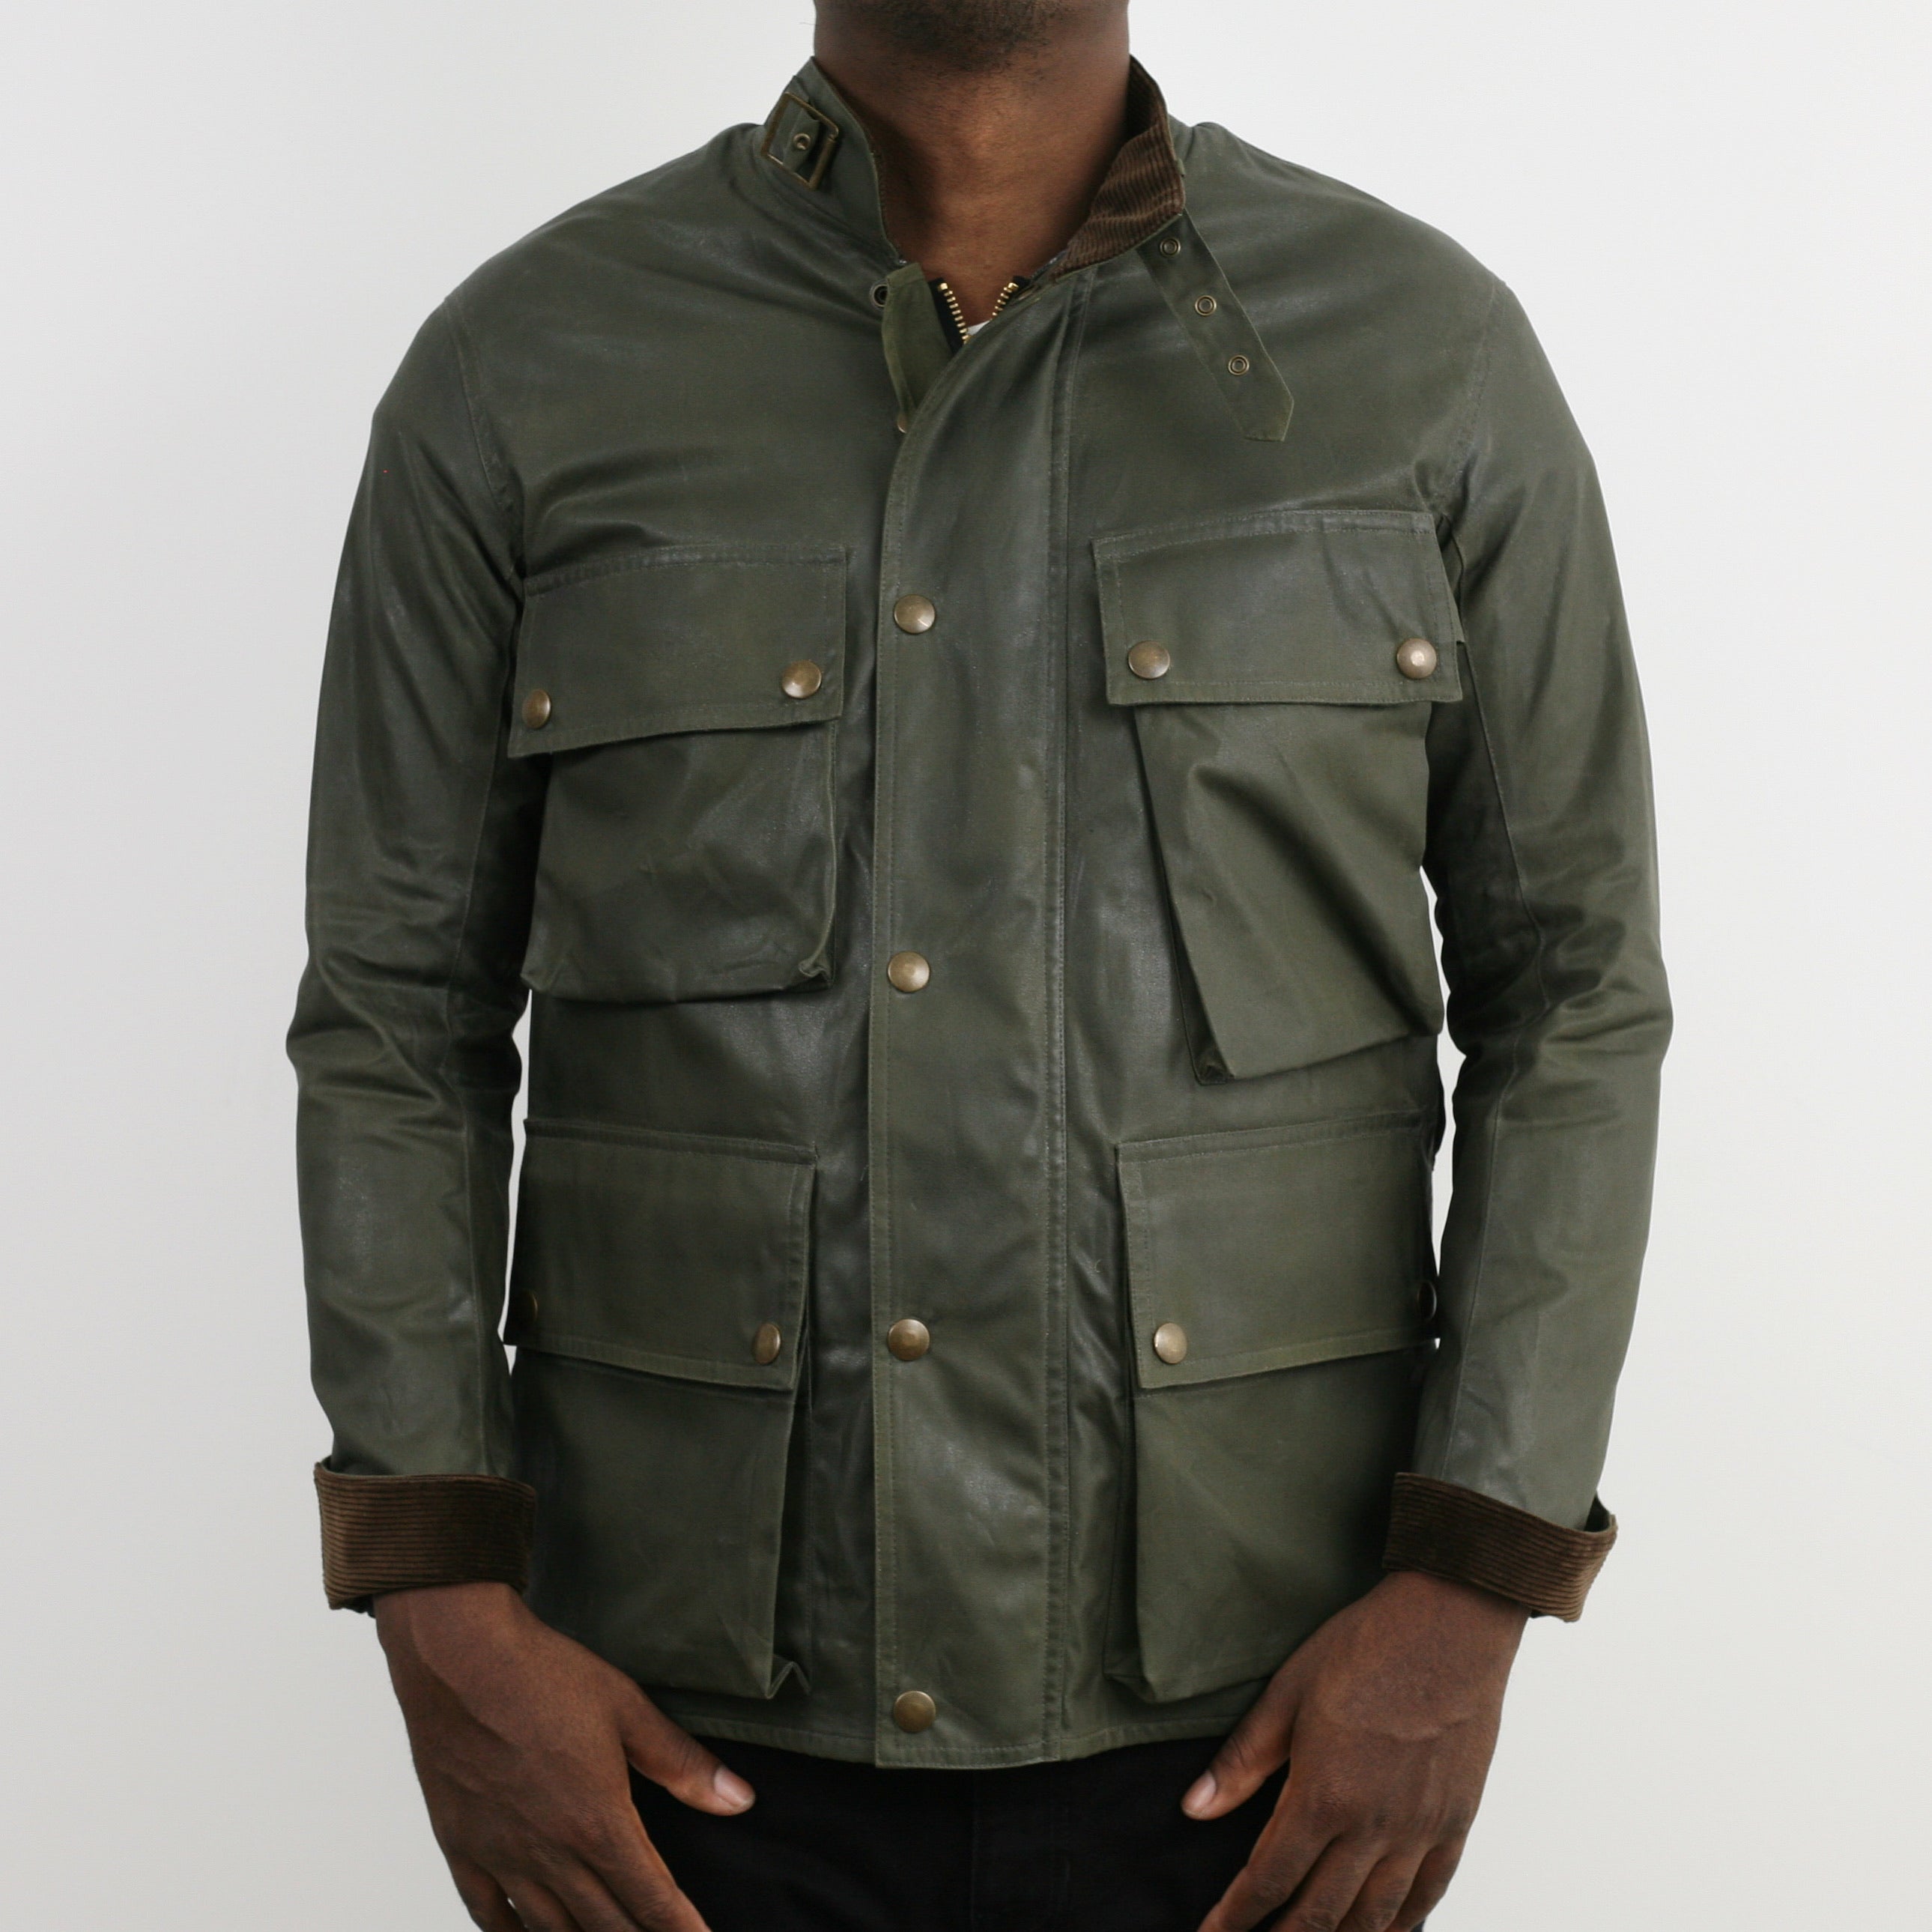 ADDICT CLOTHES Waxed Cotton BMC Jacket in Olive at TEMPO Design 